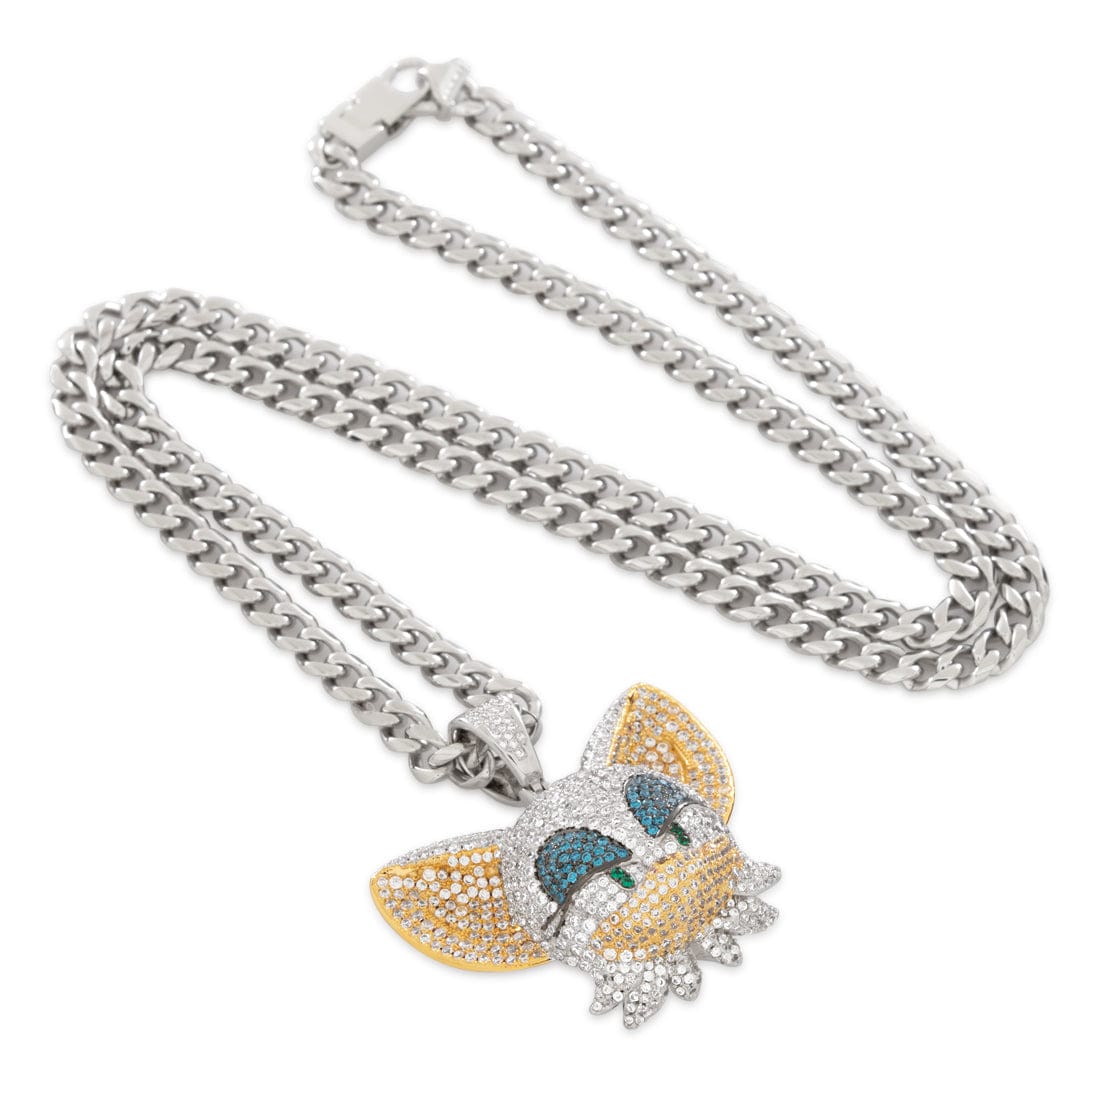 Sonic the Hedgehog x King Ice - Rouge the Bat Necklace  in  14K/White Gold / 1.5" Mens Necklaces